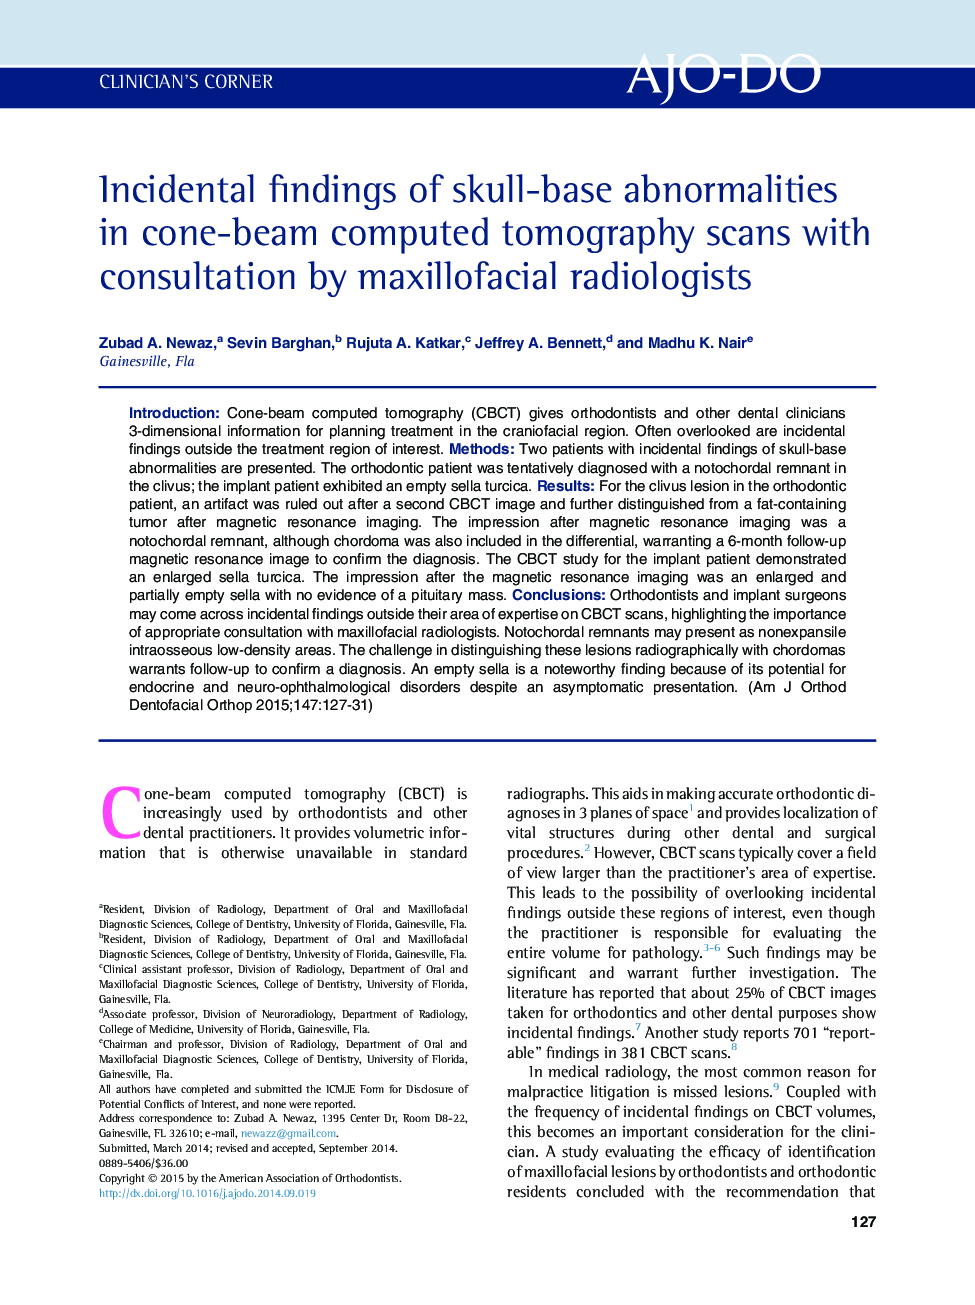 Incidental findings of skull-base abnormalities in cone-beam computed tomography scans with consultation by maxillofacial radiologists 